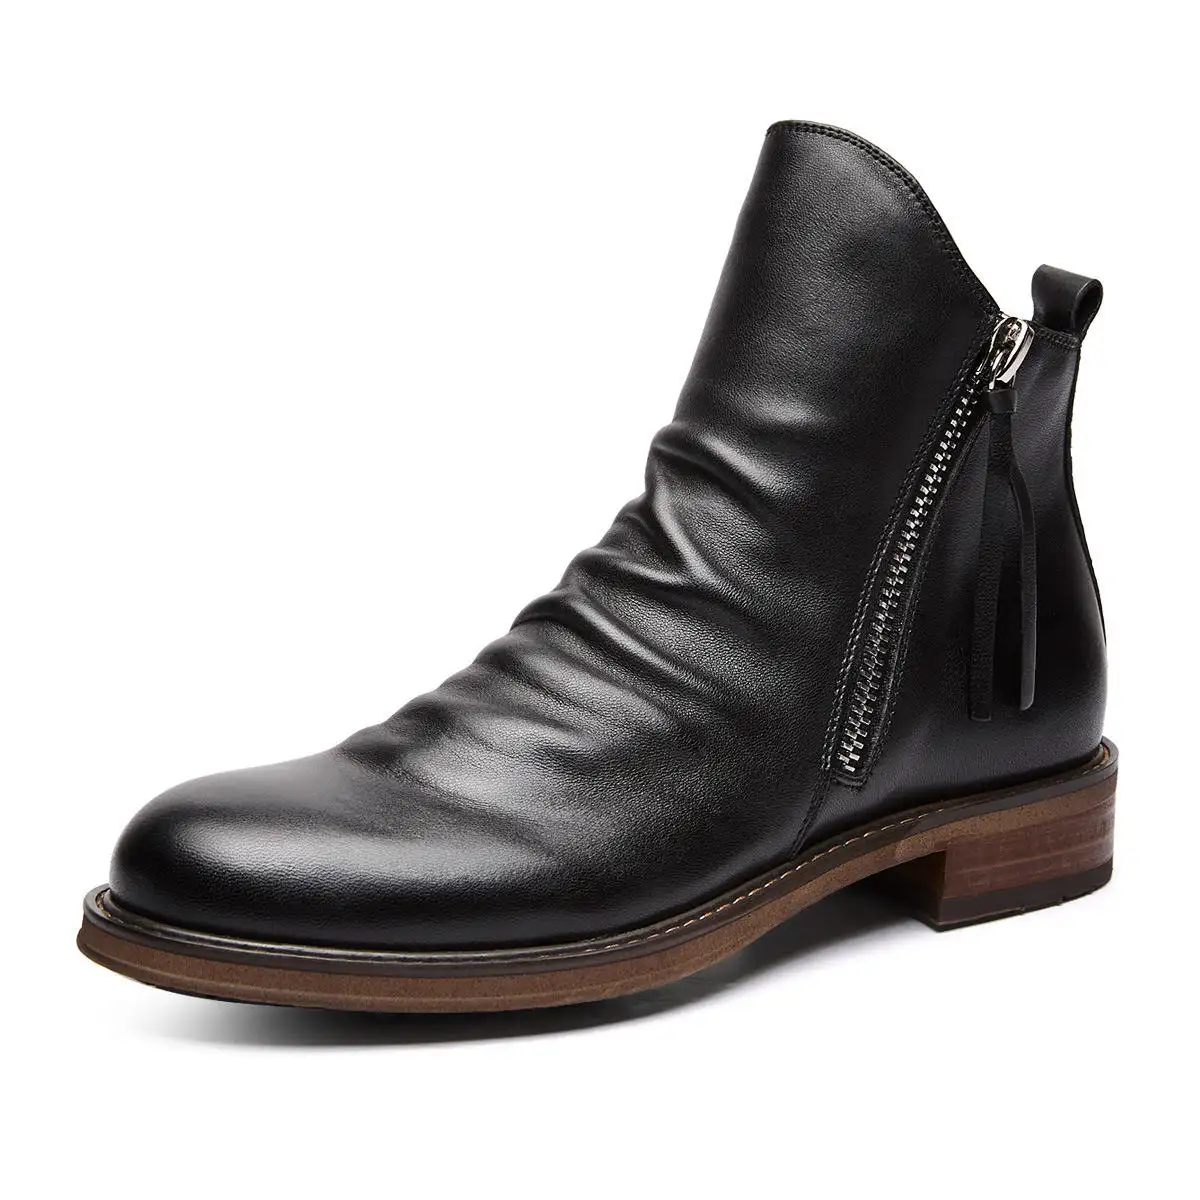 Vintage Unisex Leather Boots Women Luxury Casual Round Toe Double Zip Ankle Boots Men Business Formal Dress Chelsea Rider Shoes